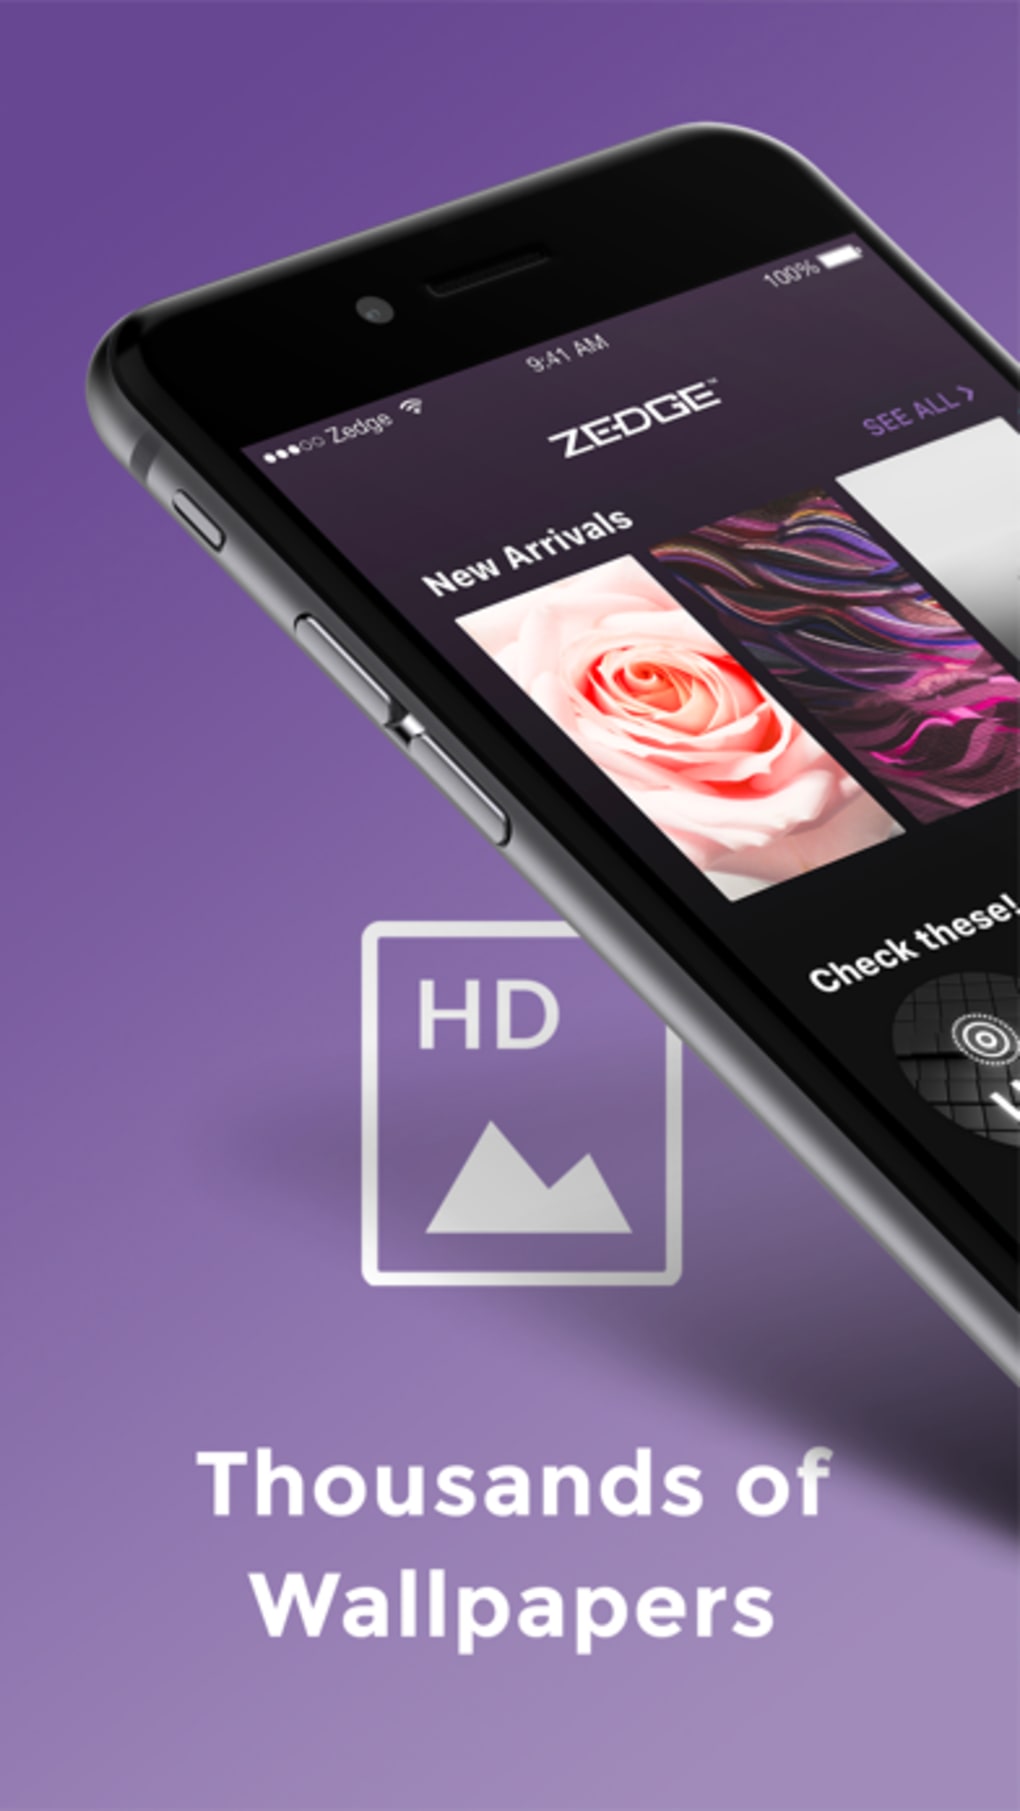 Zedge for iPhone - Download